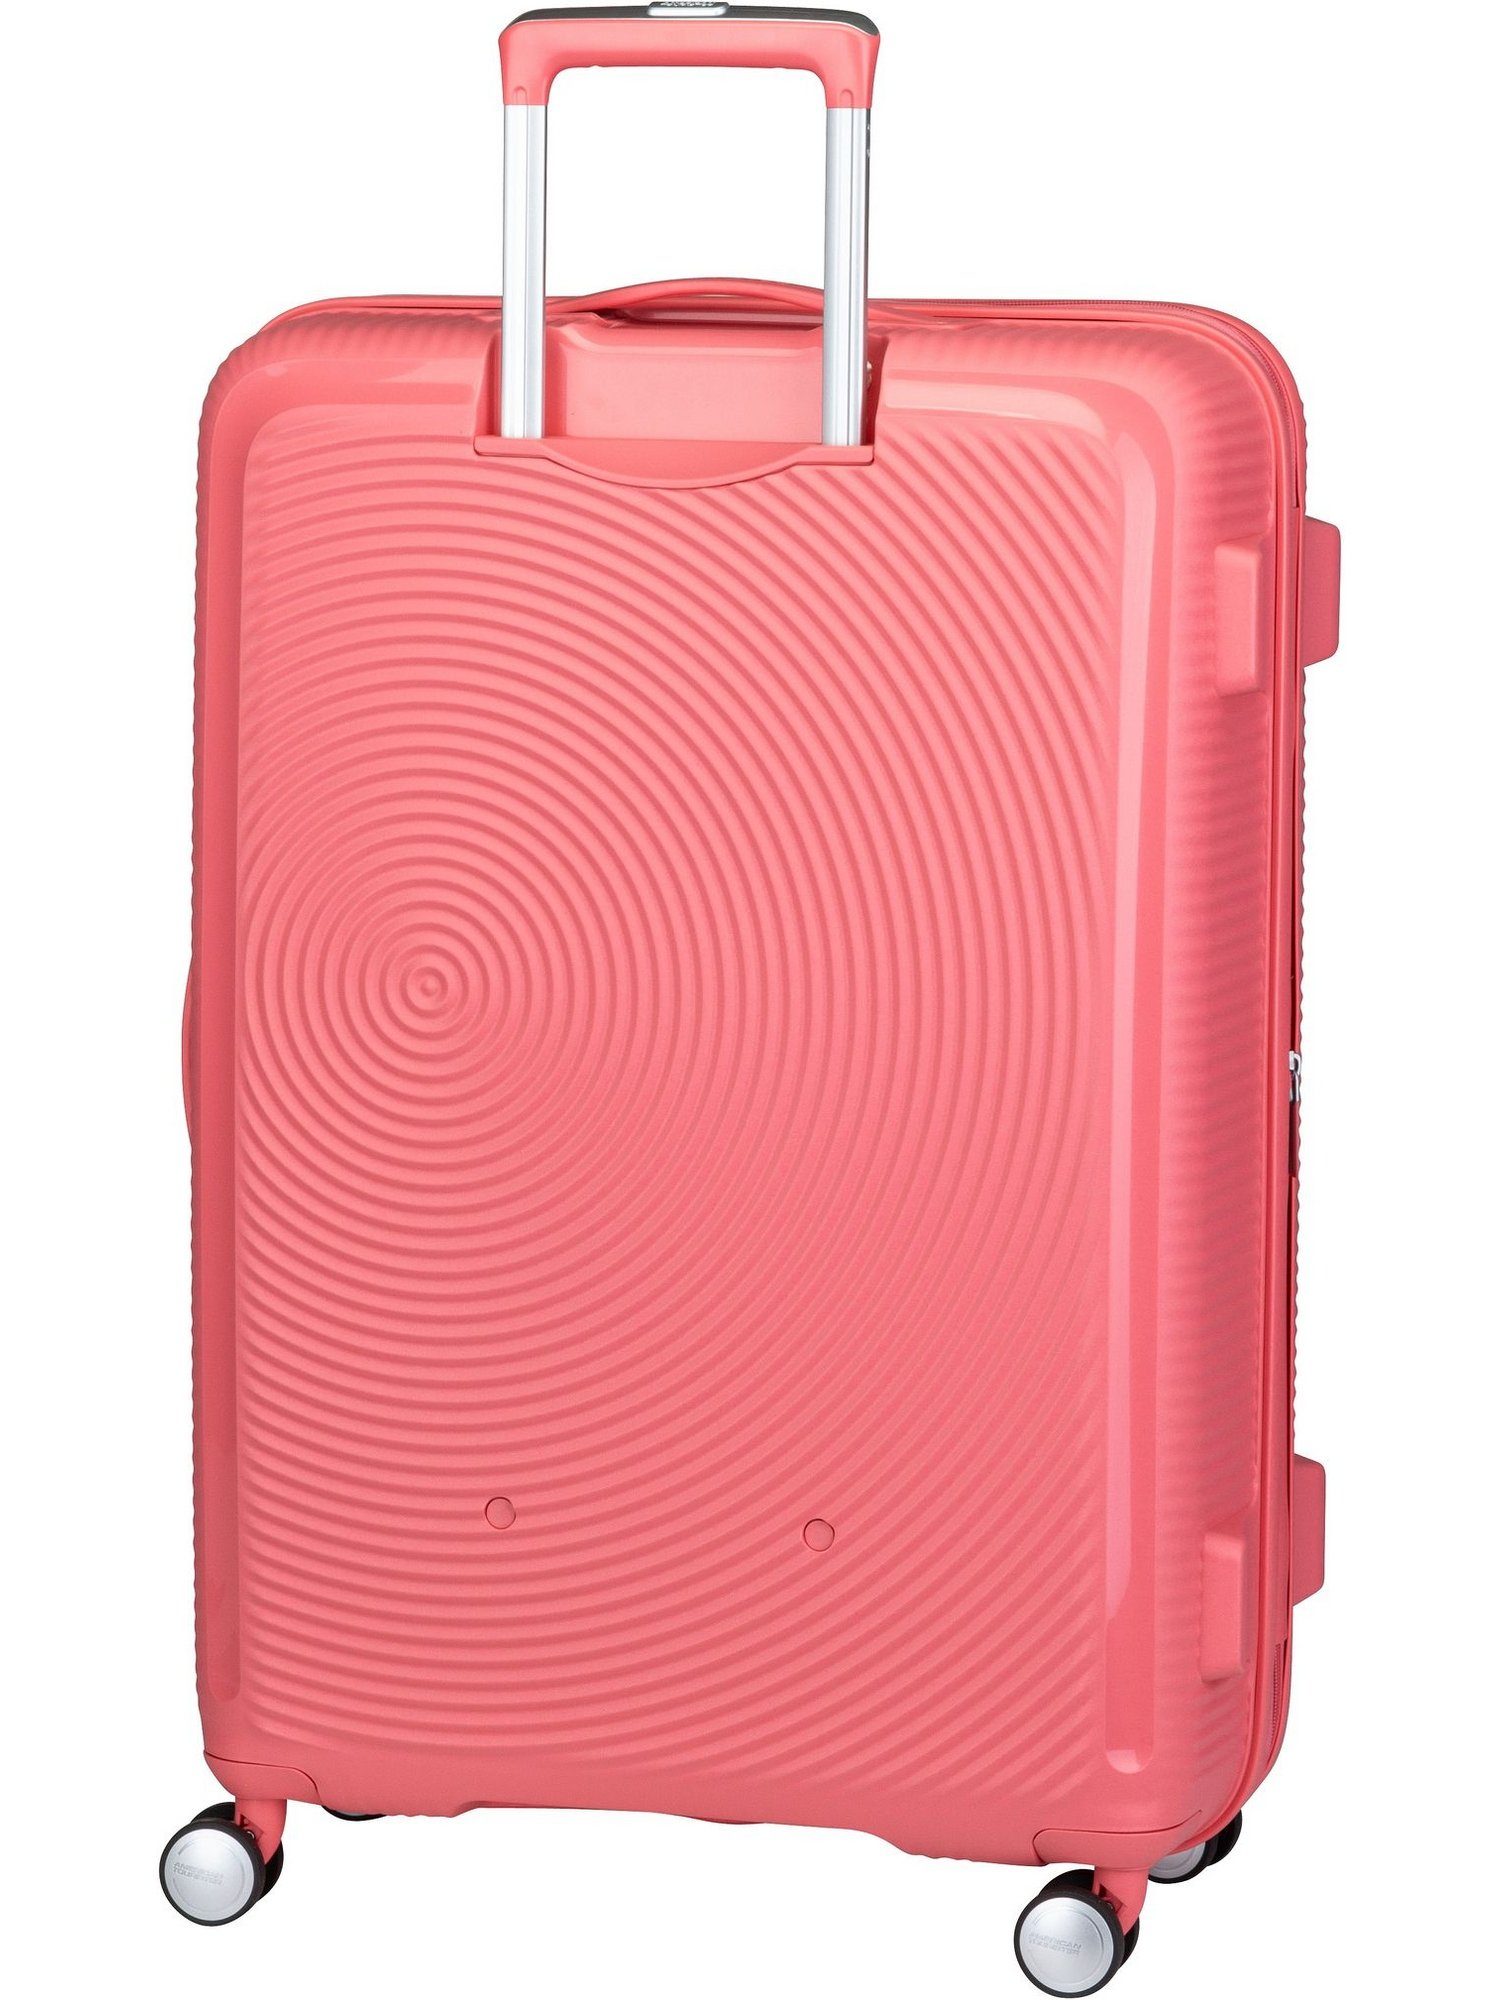 EXP Sun Coral SoundBox Kissed Spinner Trolley Tourister® American 77